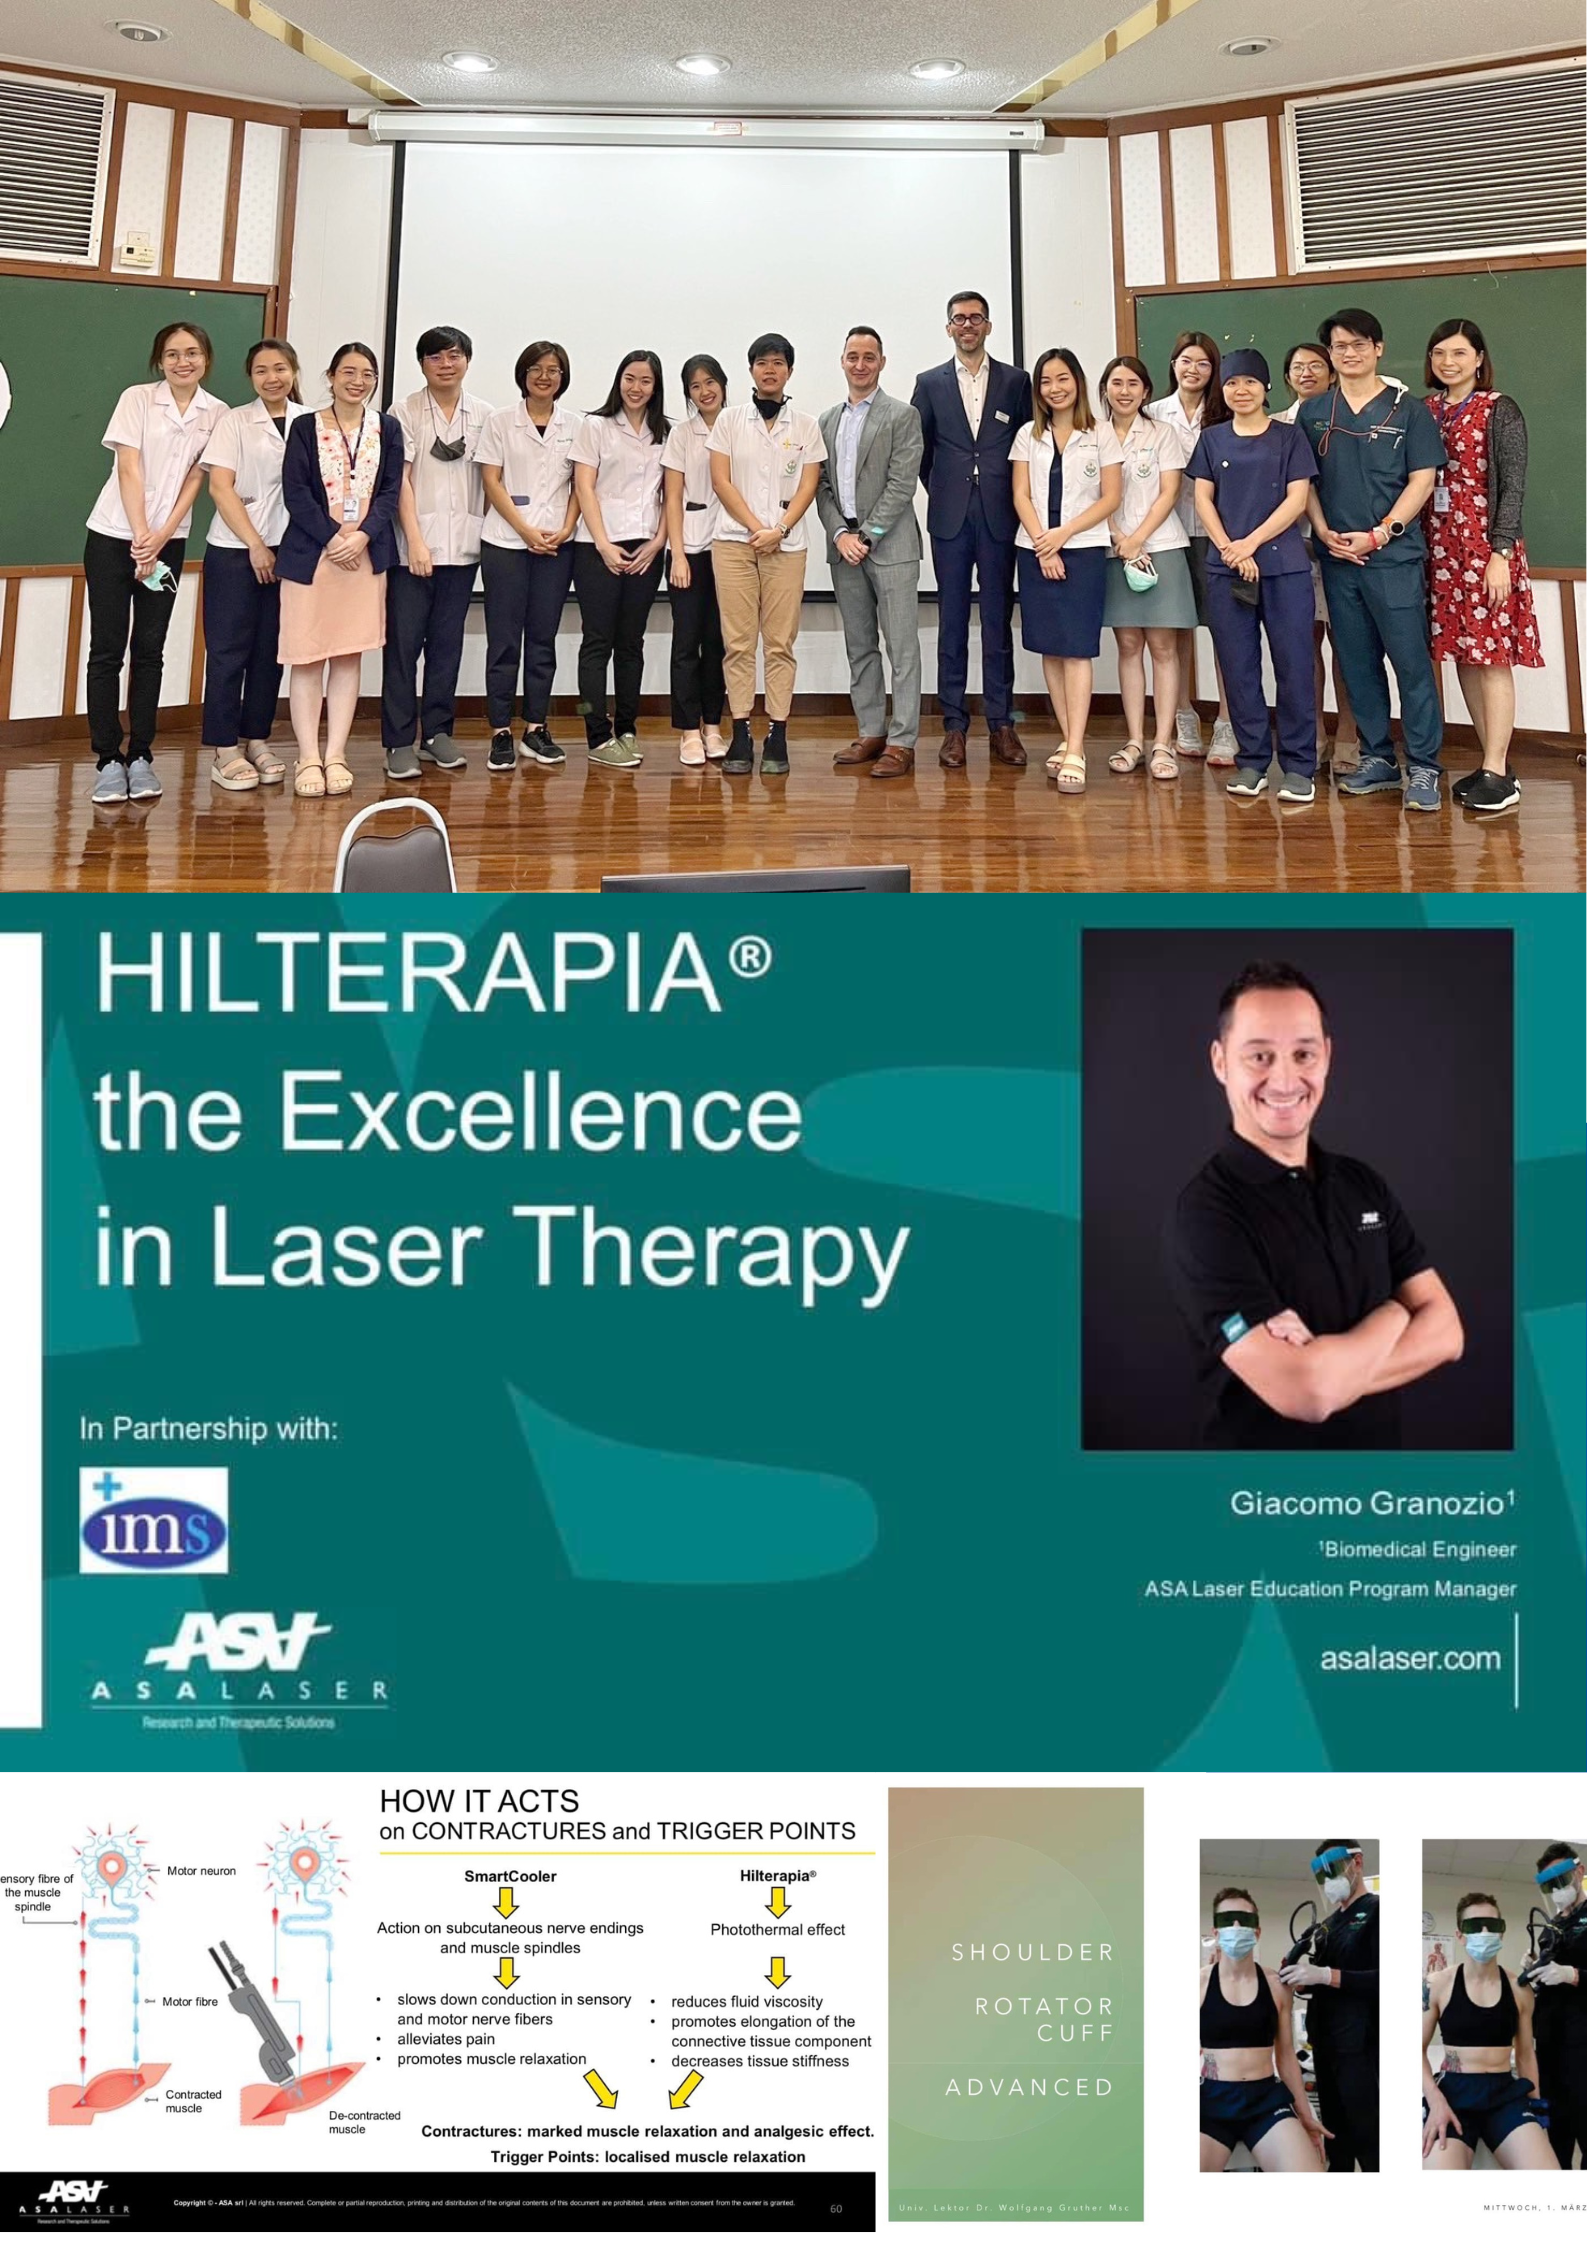 High-intensity laser therapy